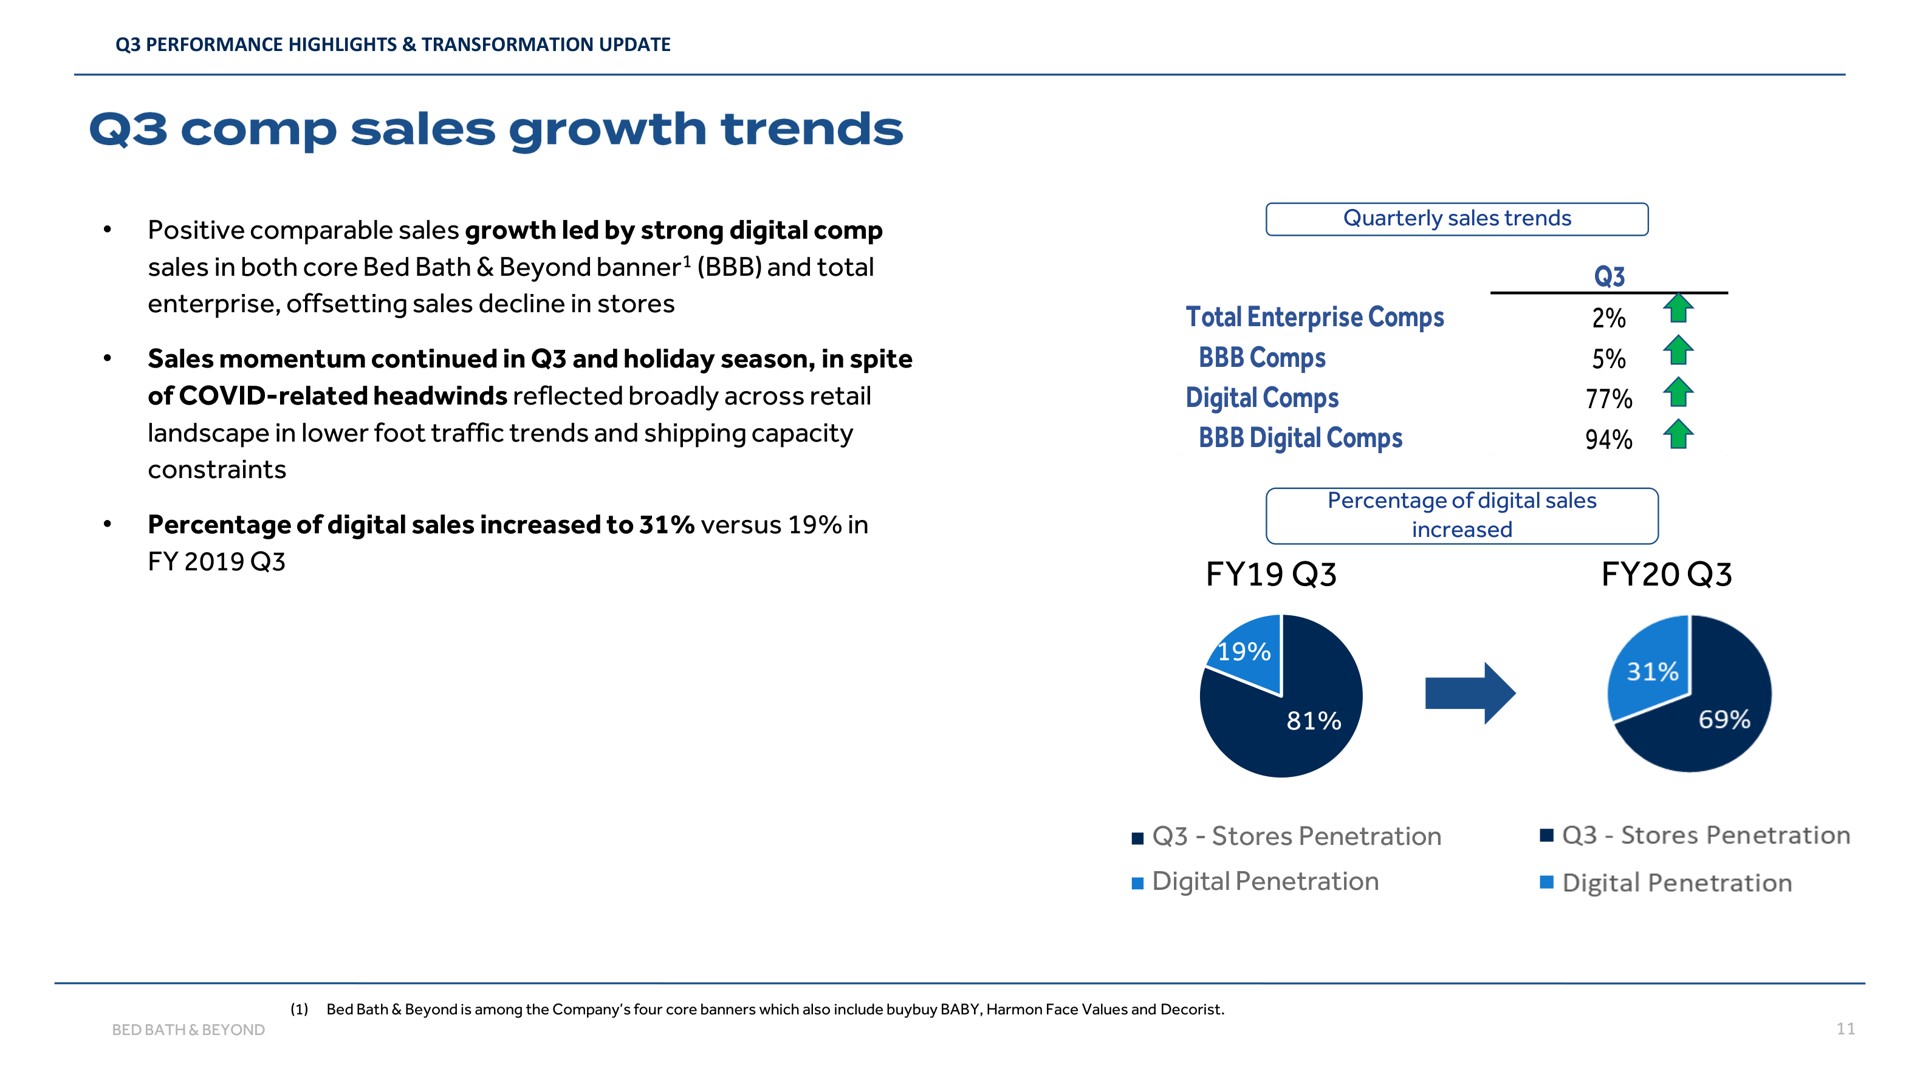 positive comparable sales growth led by strong digital sales in both core bed bath beyond banner and total enterprise offsetting sales decline in stores sales momentum continued in and holiday season in spite of covid related reflected broadly across retail landscape in lower foot traffic trends and shipping capacity constraints percentage of digital sales increased to versus in quarterly sales trends percentage of digital sales increased stores penetration digital penetration | Bed Bath & Beyond